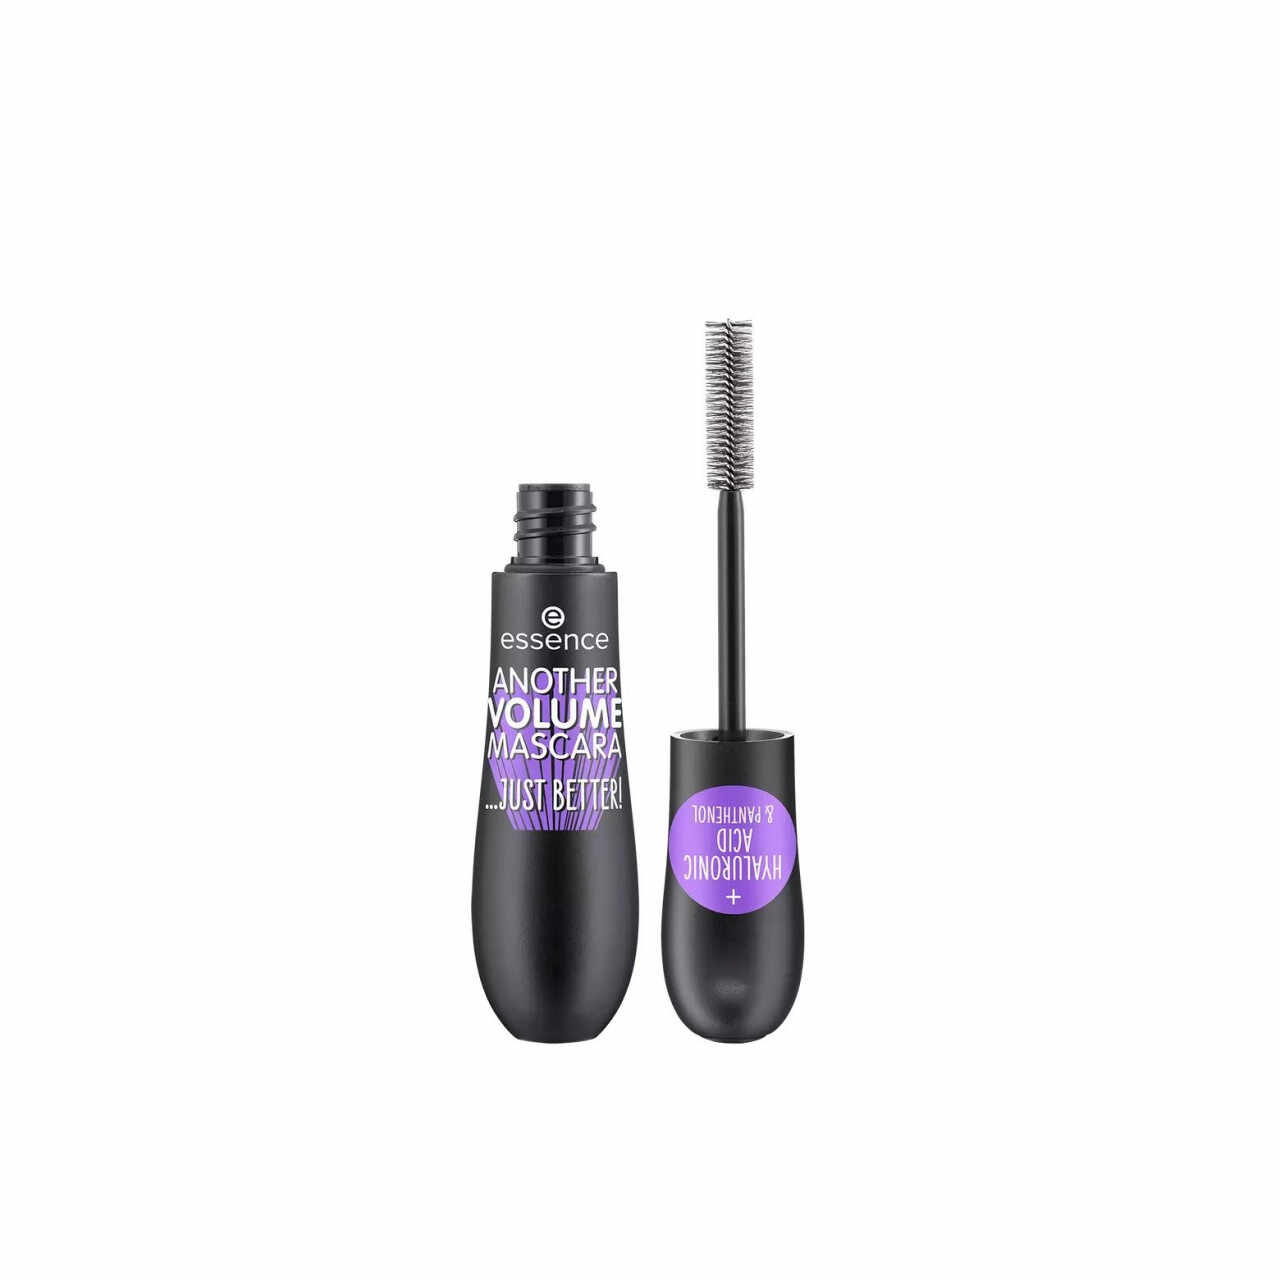 ESSENCE ANOTHER VOLUME MASCARA JUST BETTER